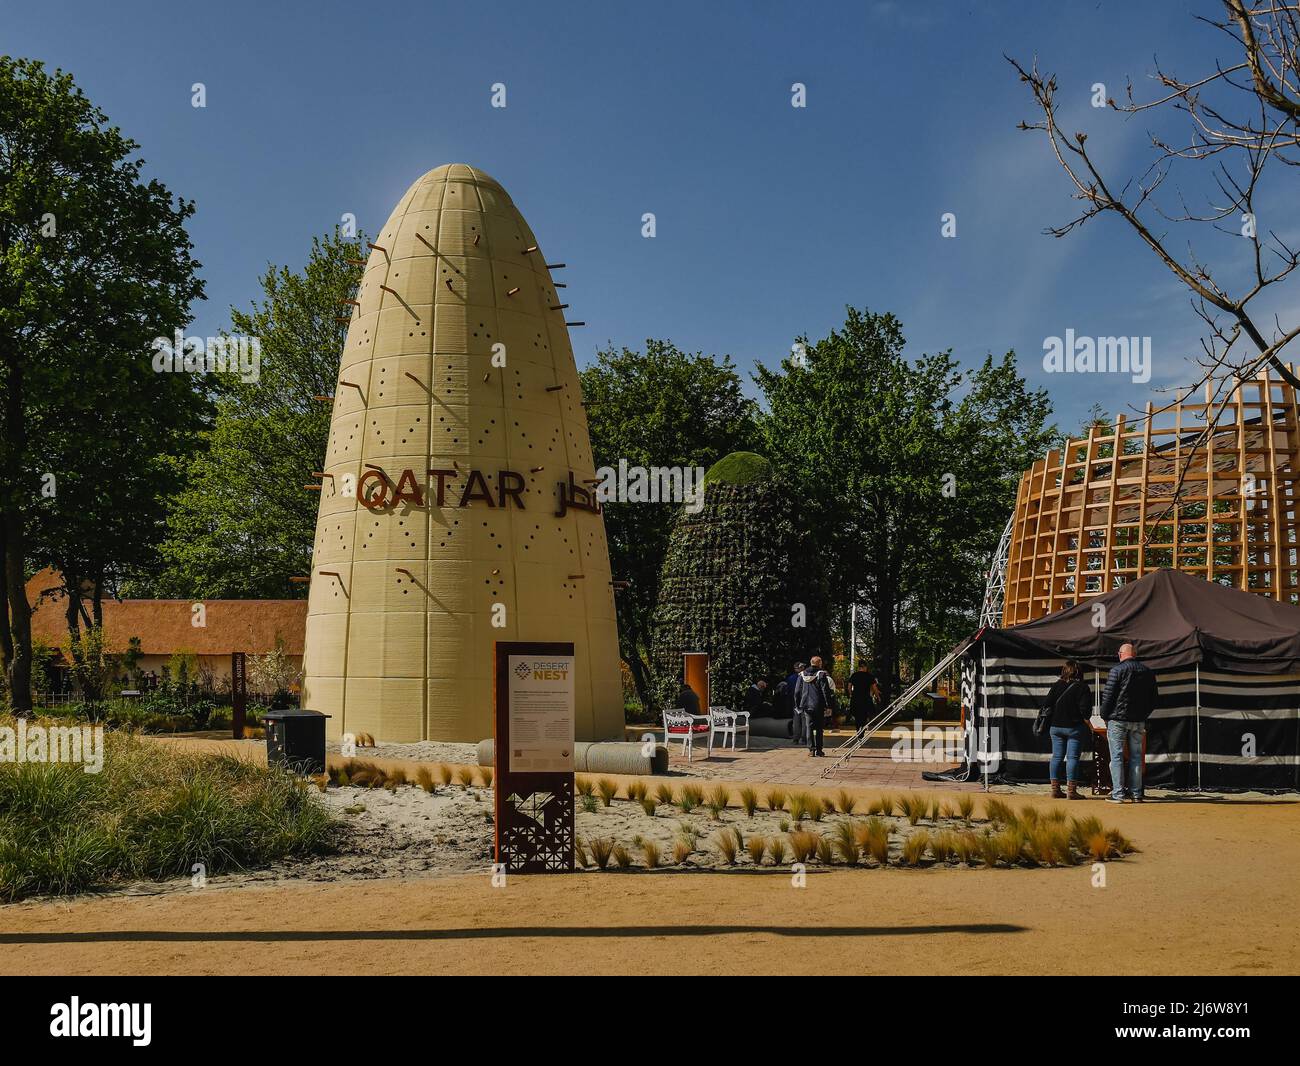 Qatar pavillion at the international horticulture Floriade Expo in Almere 2022 Stock Photo